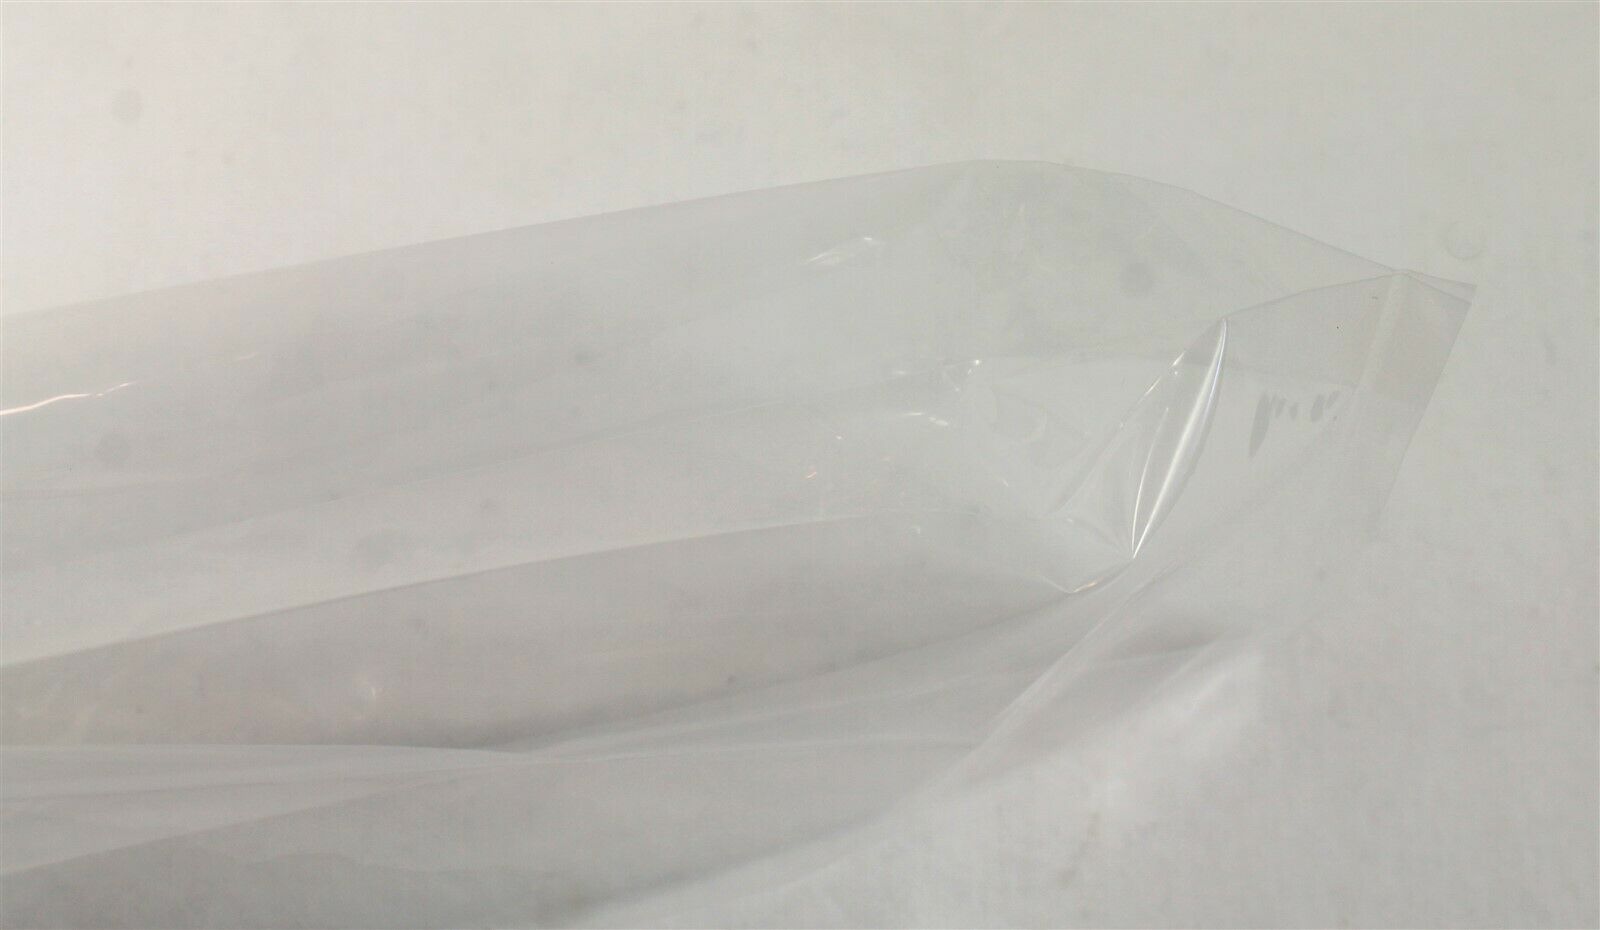 500 CLEAR 2 x 4 ULINE 2 MIL THICK POLY BAGS LAY FLAT OPEN TOP PLASTIC PACKING 